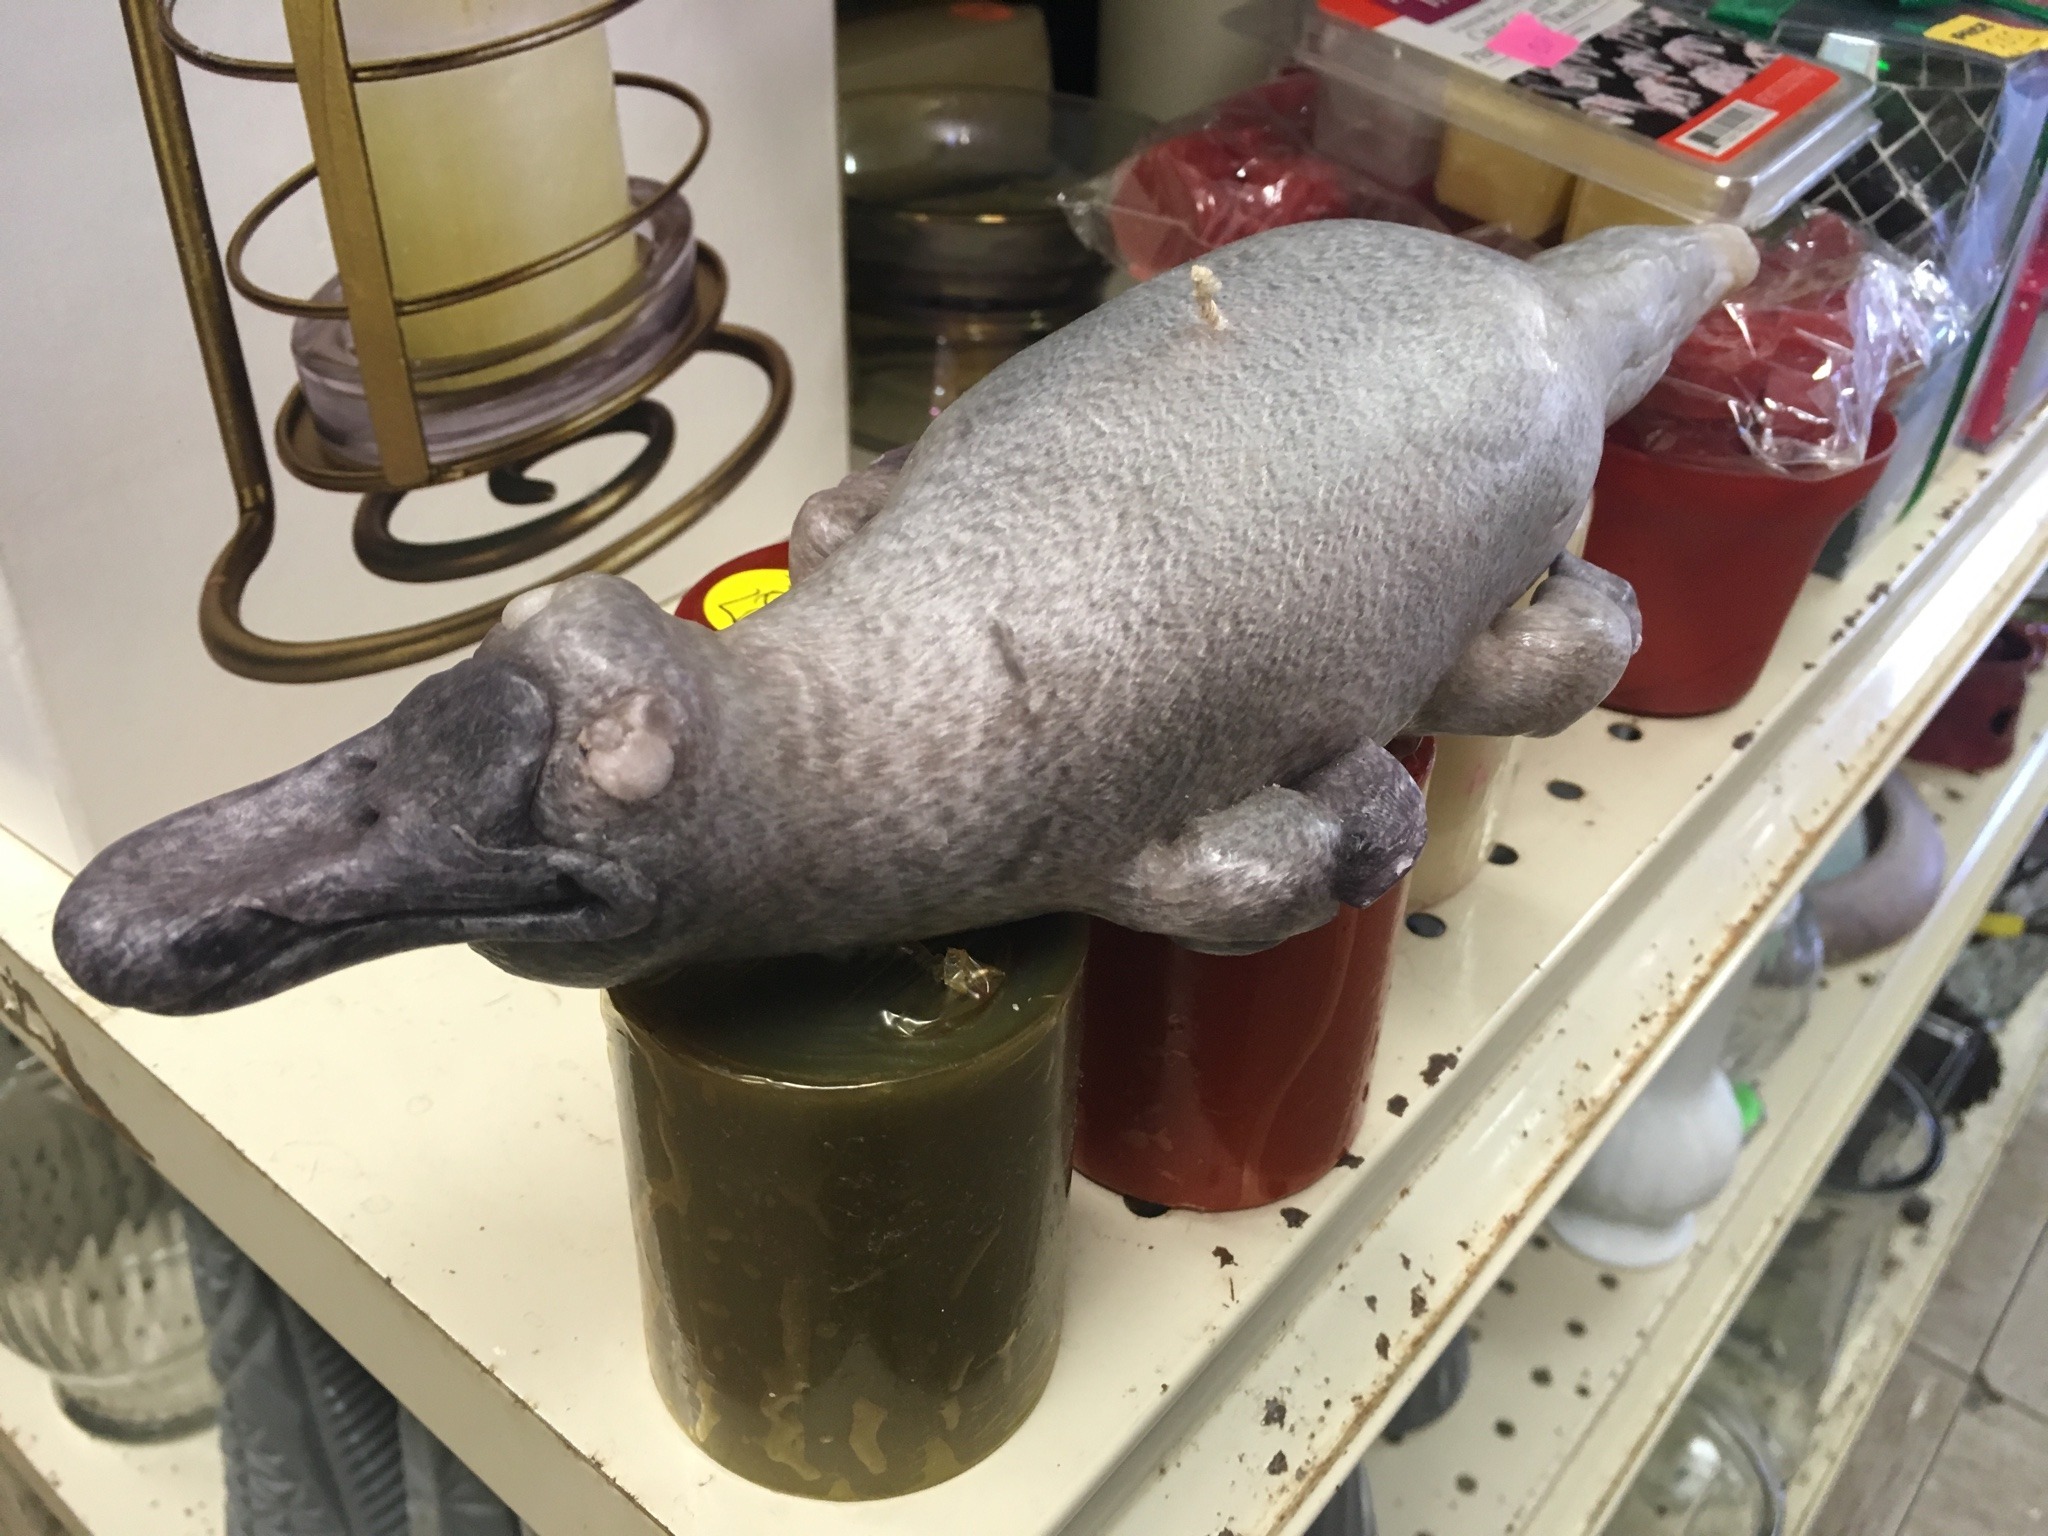 Porn shiftythrifting:Platypus (?) candle. There photos